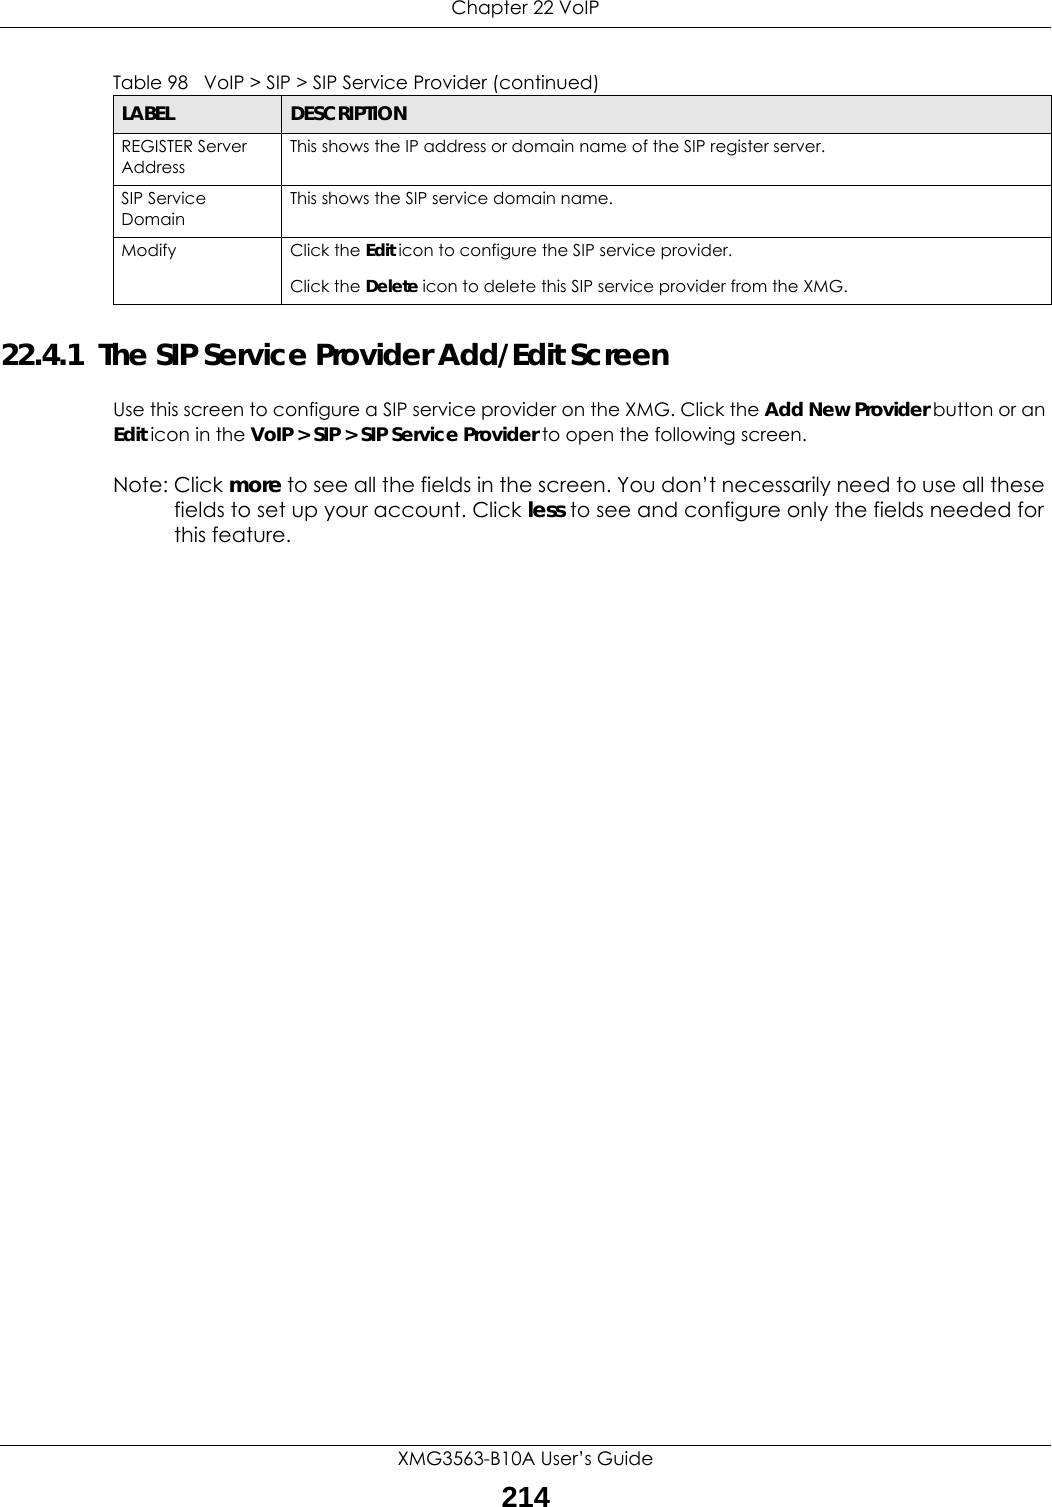 Chapter 22 VoIPXMG3563-B10A User’s Guide21422.4.1  The SIP Service Provider Add/Edit Screen Use this screen to configure a SIP service provider on the XMG. Click the Add New Provider button or an Edit icon in the VoIP &gt; SIP &gt; SIP Service Provider to open the following screen. Note: Click more to see all the fields in the screen. You don’t necessarily need to use all these fields to set up your account. Click less to see and configure only the fields needed for this feature. REGISTER Server AddressThis shows the IP address or domain name of the SIP register server.SIP Service DomainThis shows the SIP service domain name.Modify Click the Edit icon to configure the SIP service provider.Click the Delete icon to delete this SIP service provider from the XMG. Table 98   VoIP &gt; SIP &gt; SIP Service Provider (continued)LABEL DESCRIPTION